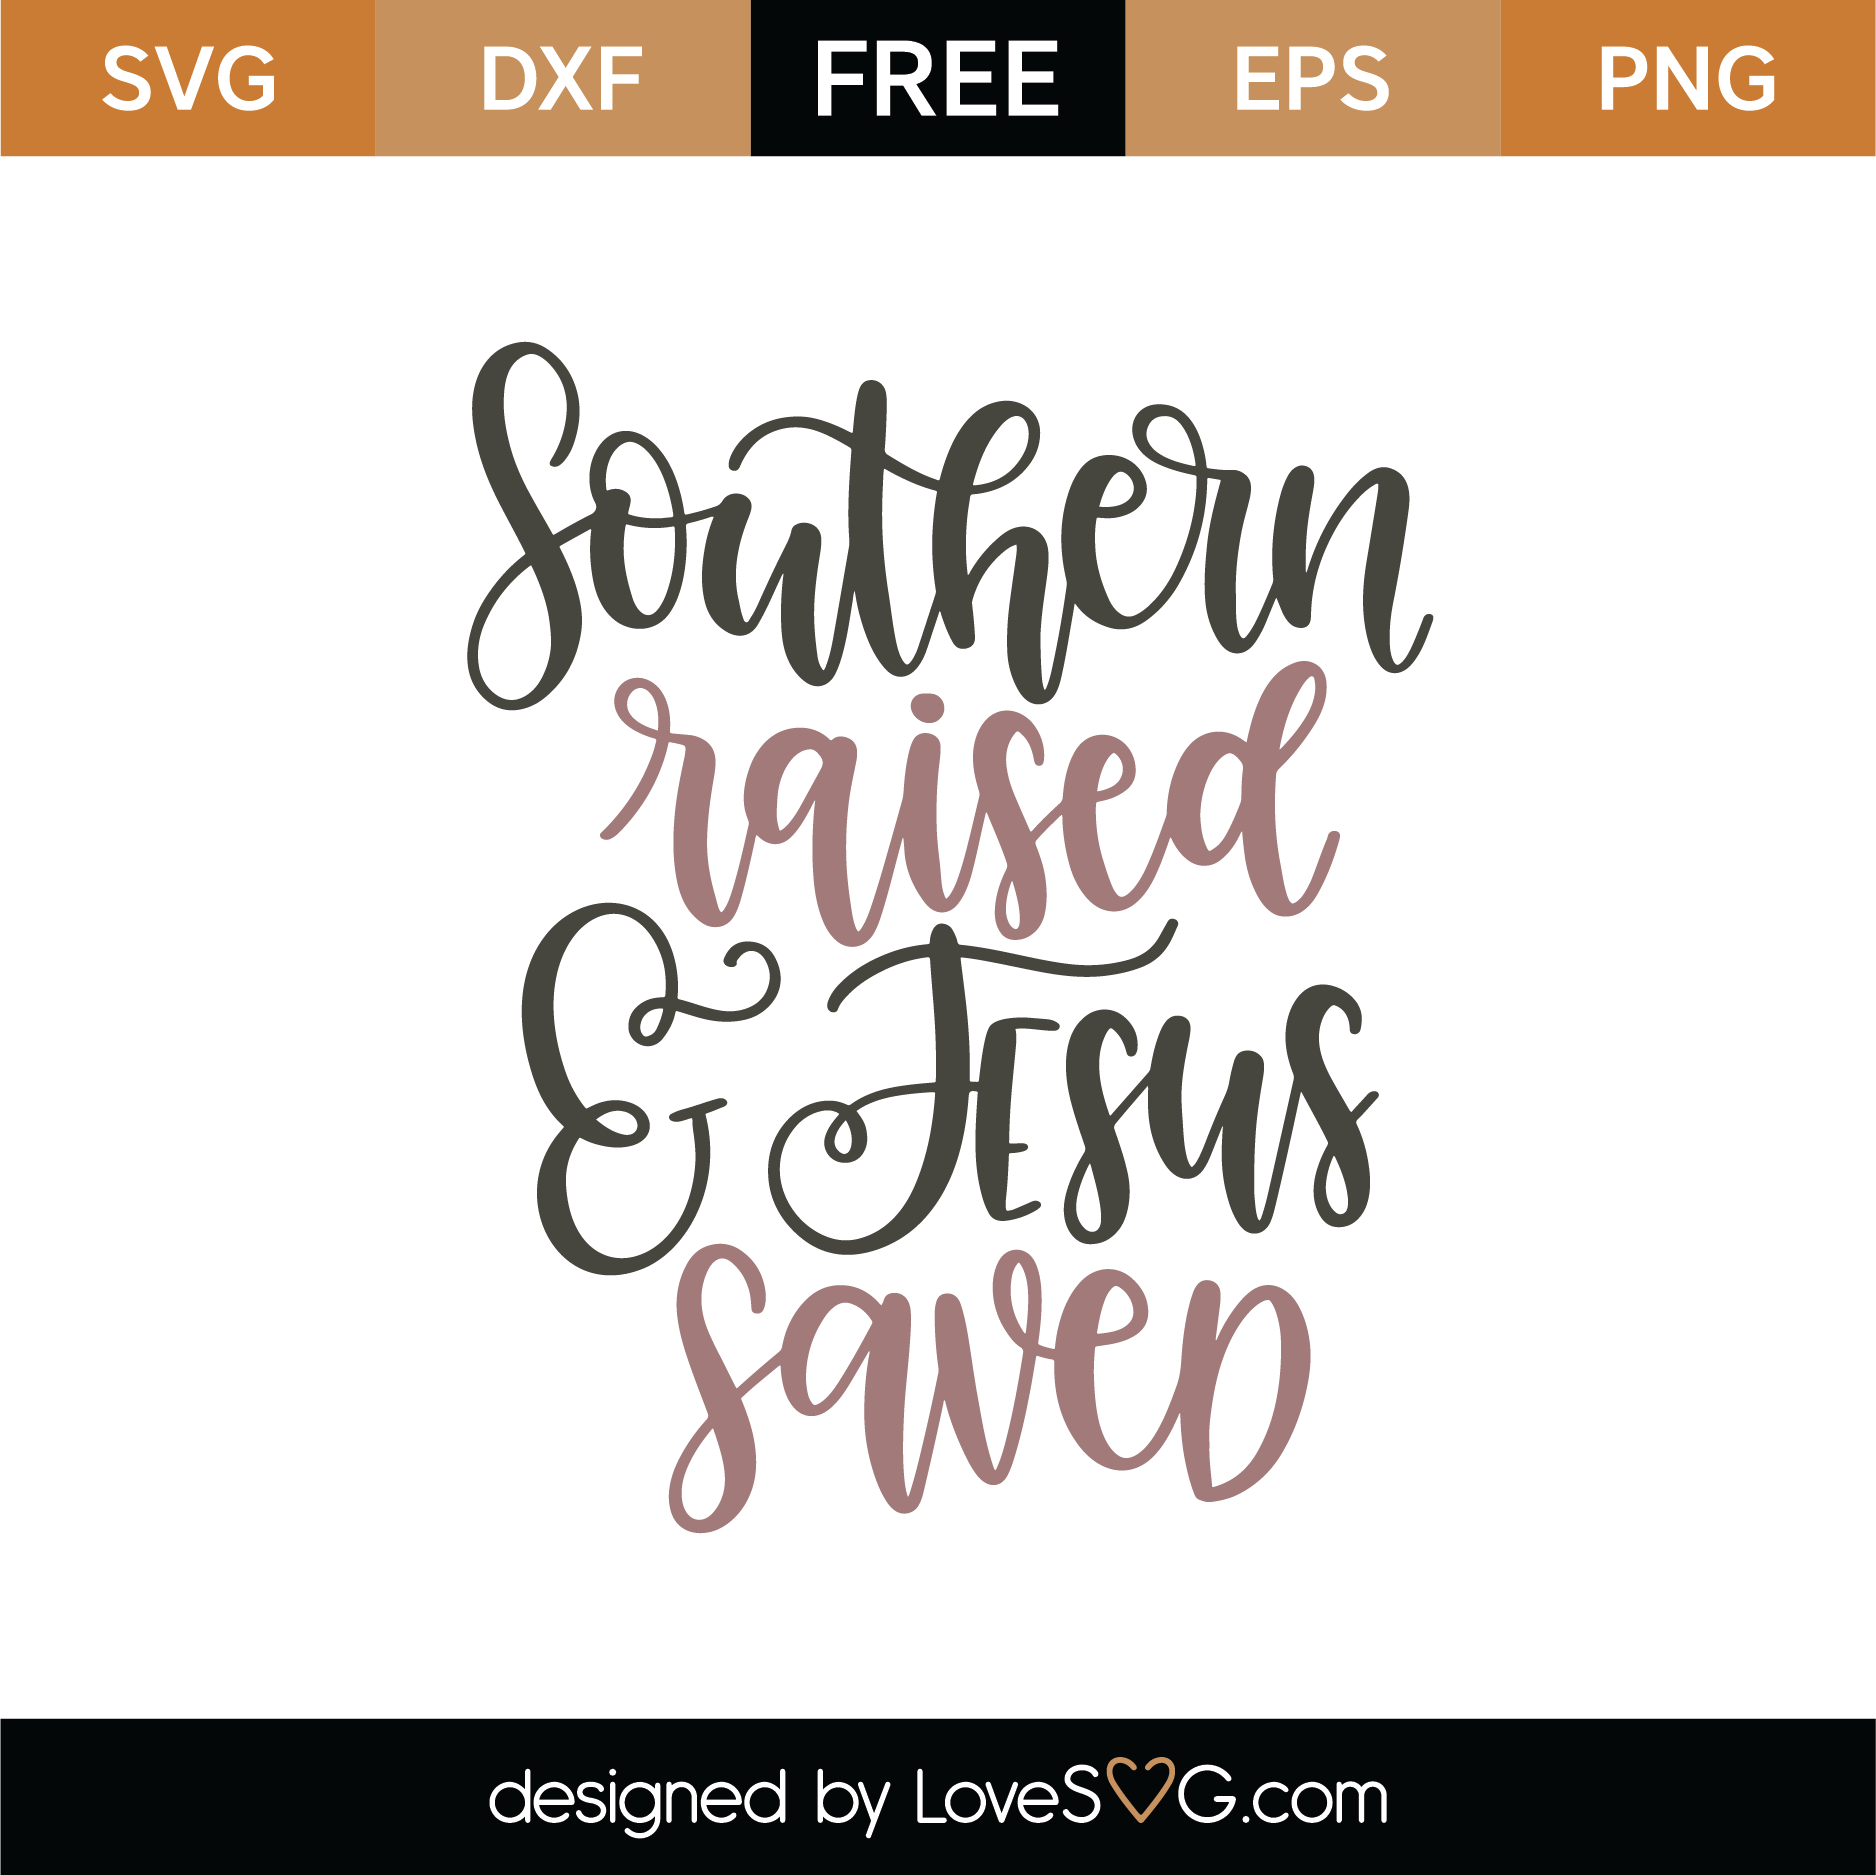 Download Free Southern Raised and Jesus Saved SVG Cut File ...